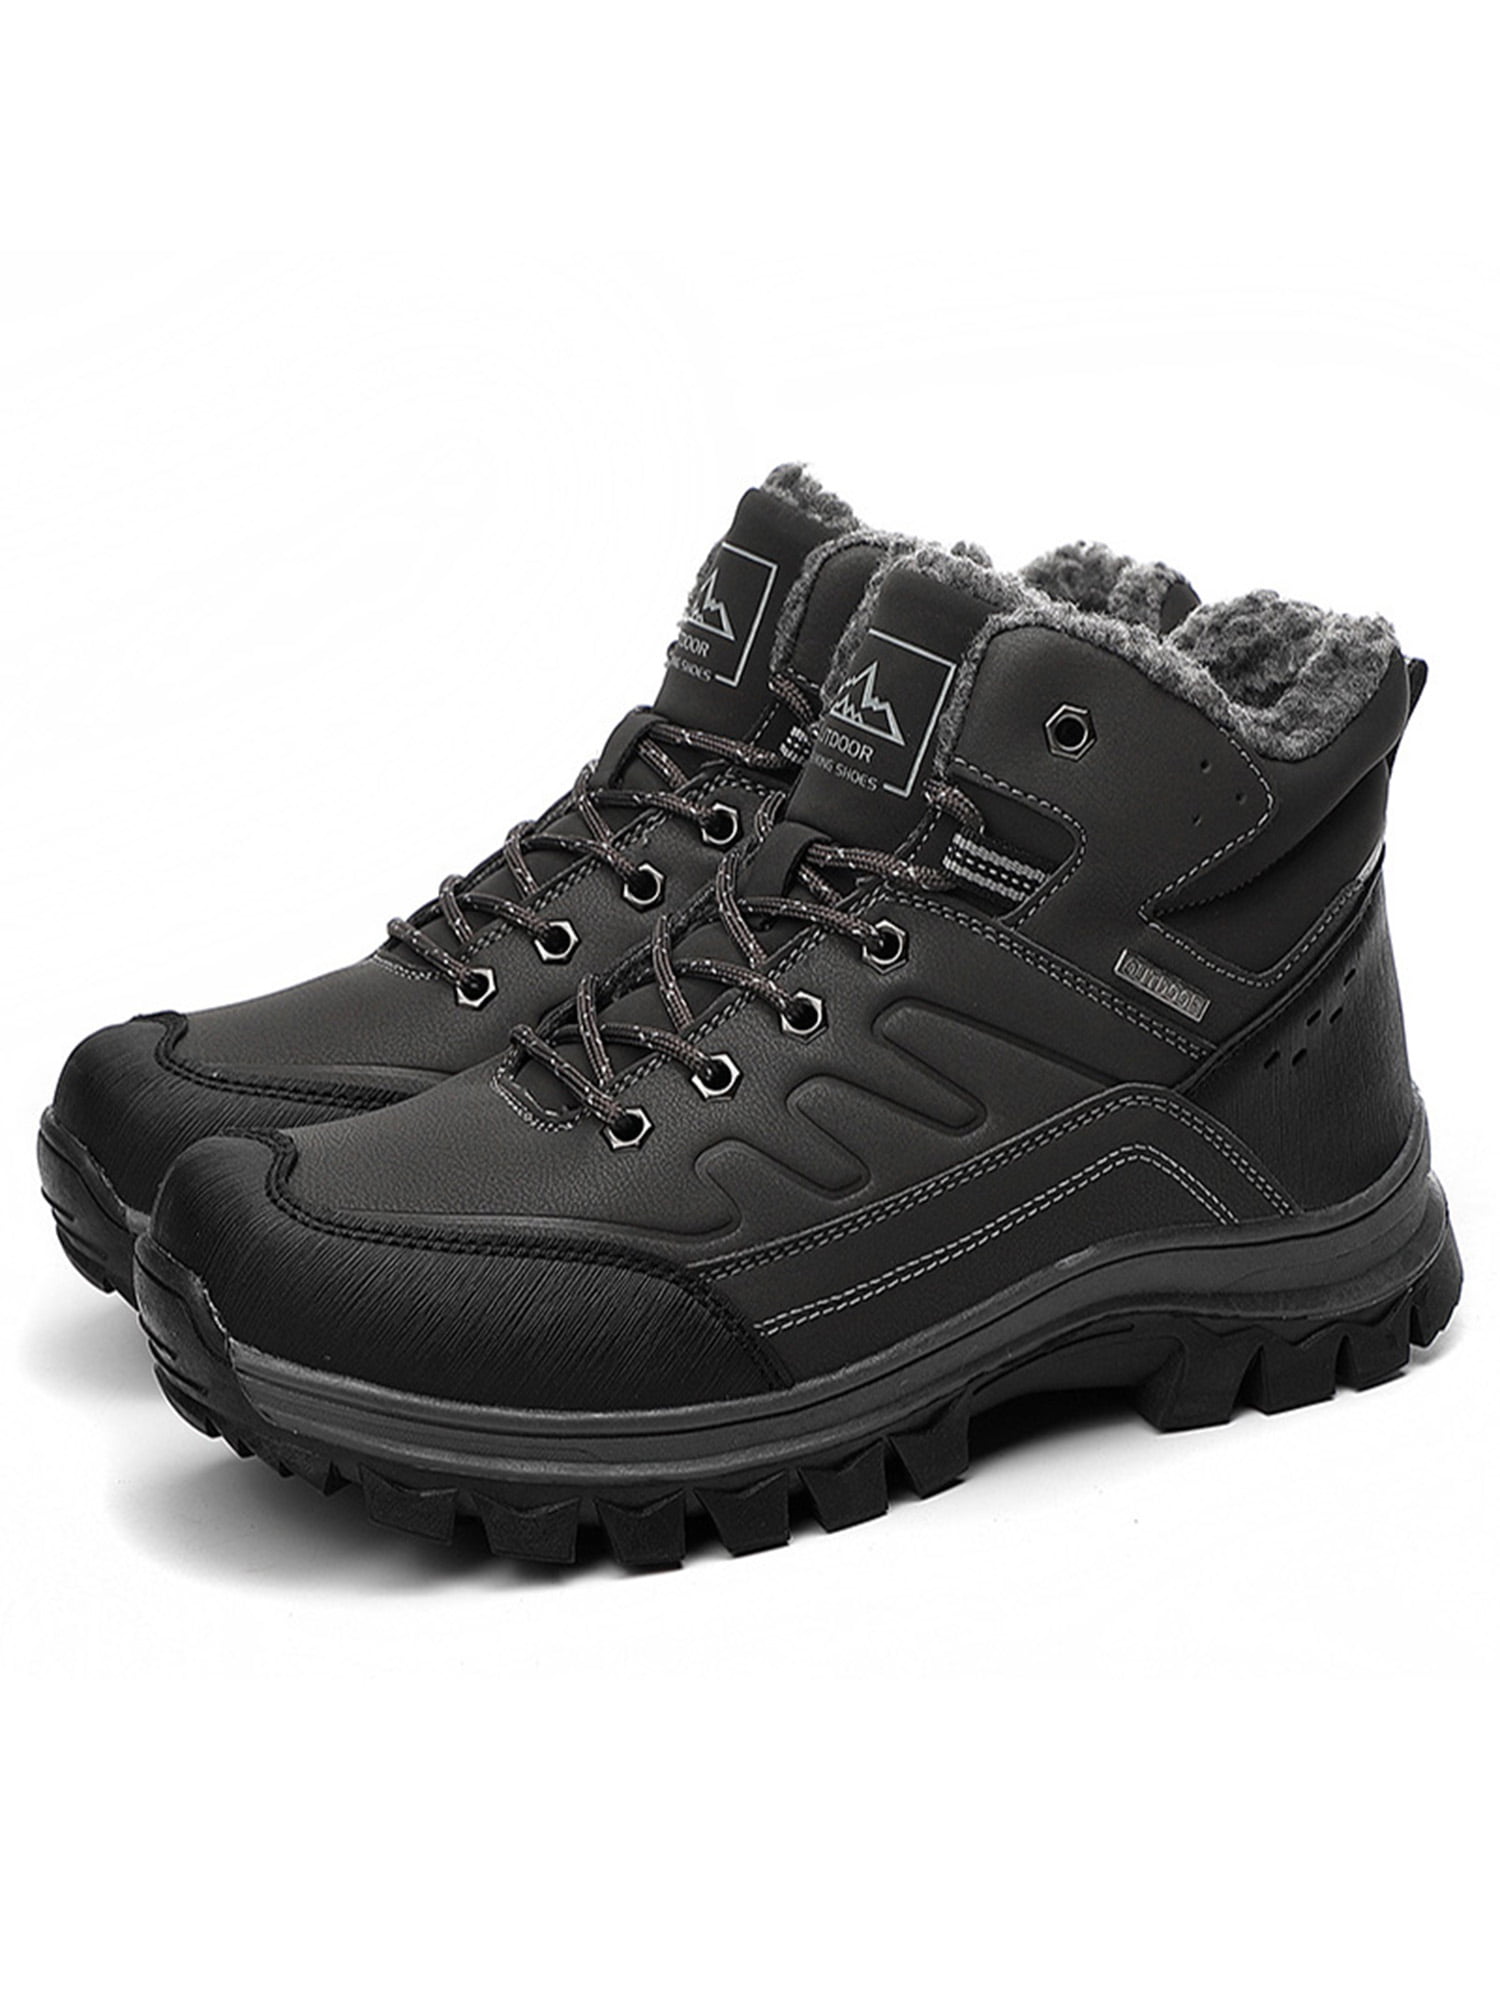 Details about   MENS WOMENS SAFETY WORK BOOTS STEEL TOE CAP SHOES FAUX LEATHER HIKING OUTDOOR 